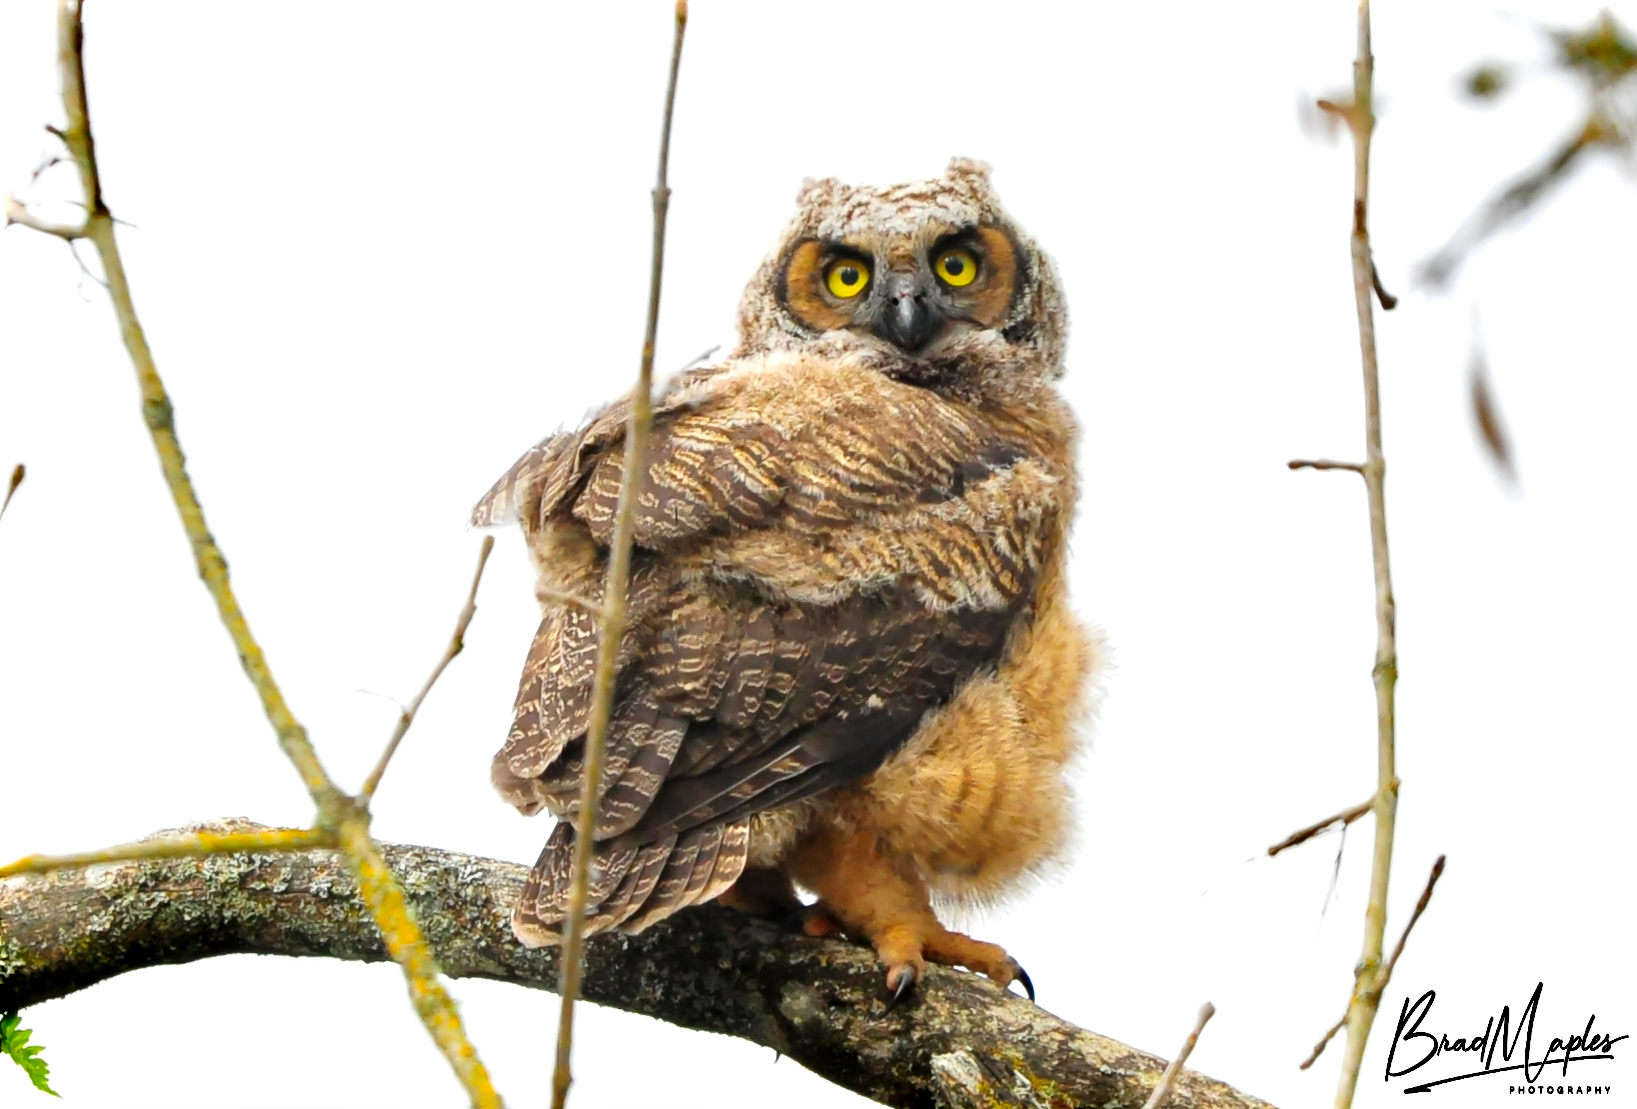 THIS OWLET IS ONE OF TWO RECENTLY HATCHED @ THE RIDGEFIELD WILDLIFE REFUGE & WAS VERY ACTIVE T...jpg